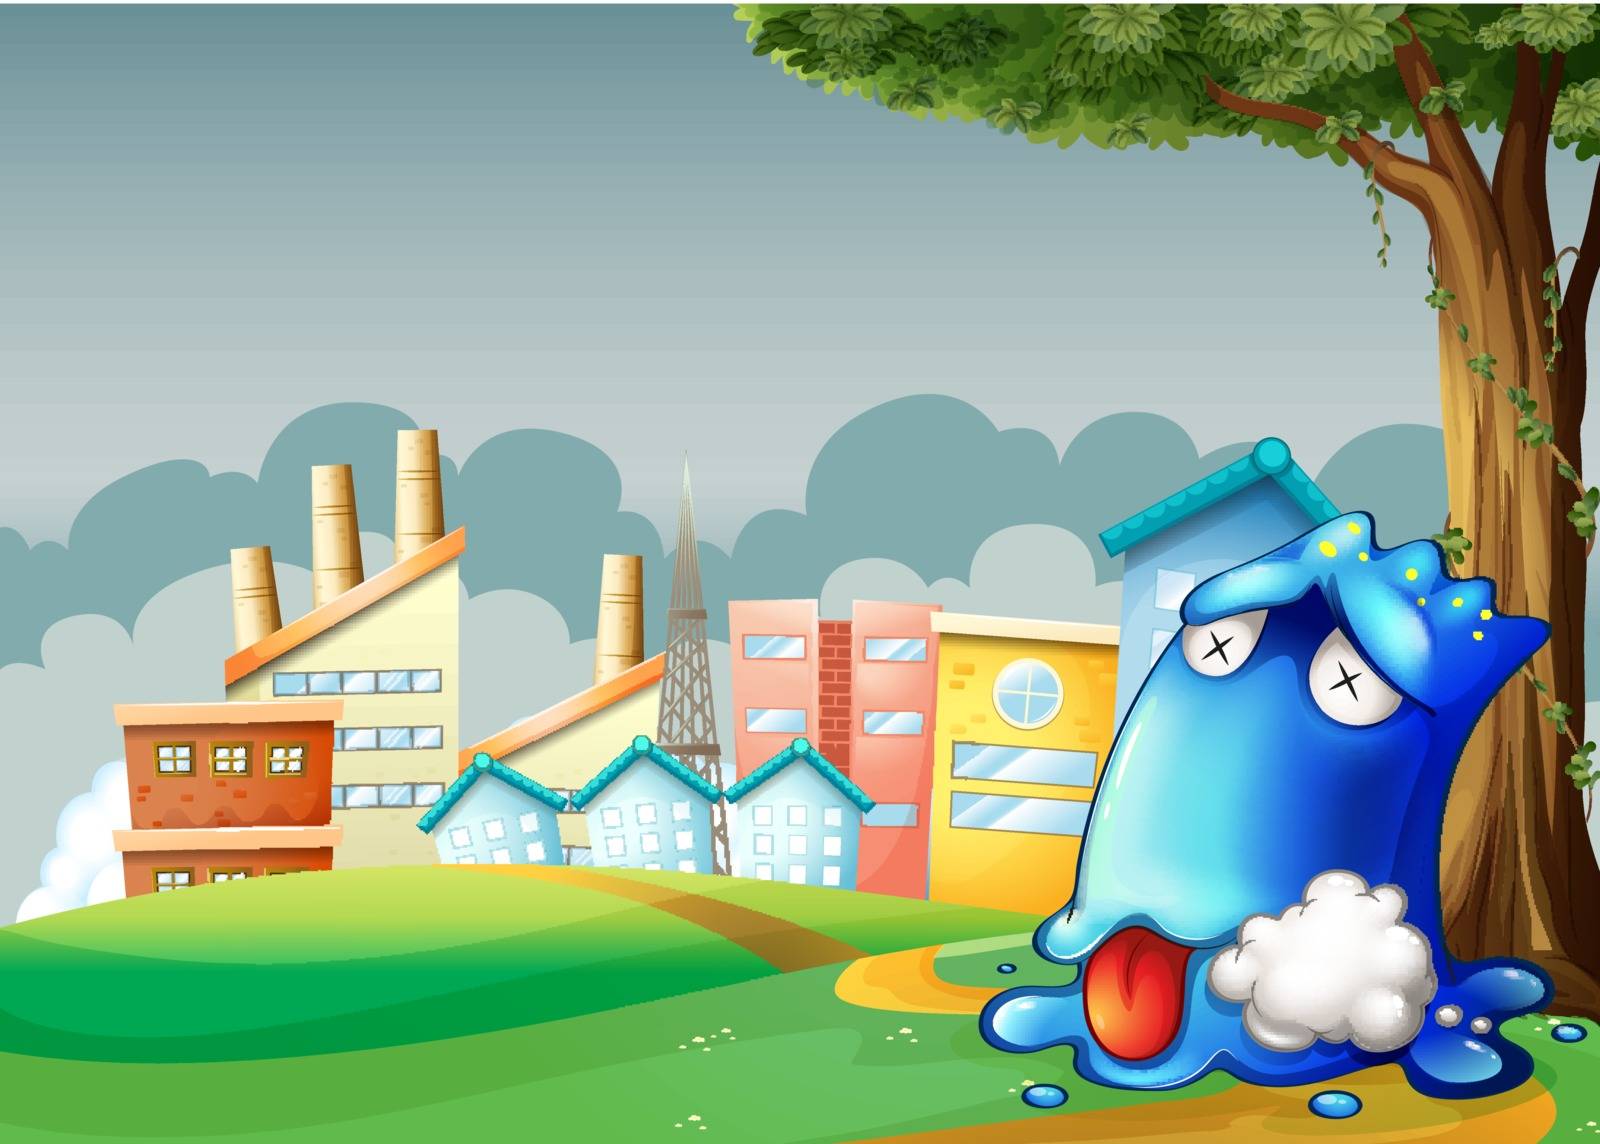 Illustration of a poisoned monster resting under the tree across the factories